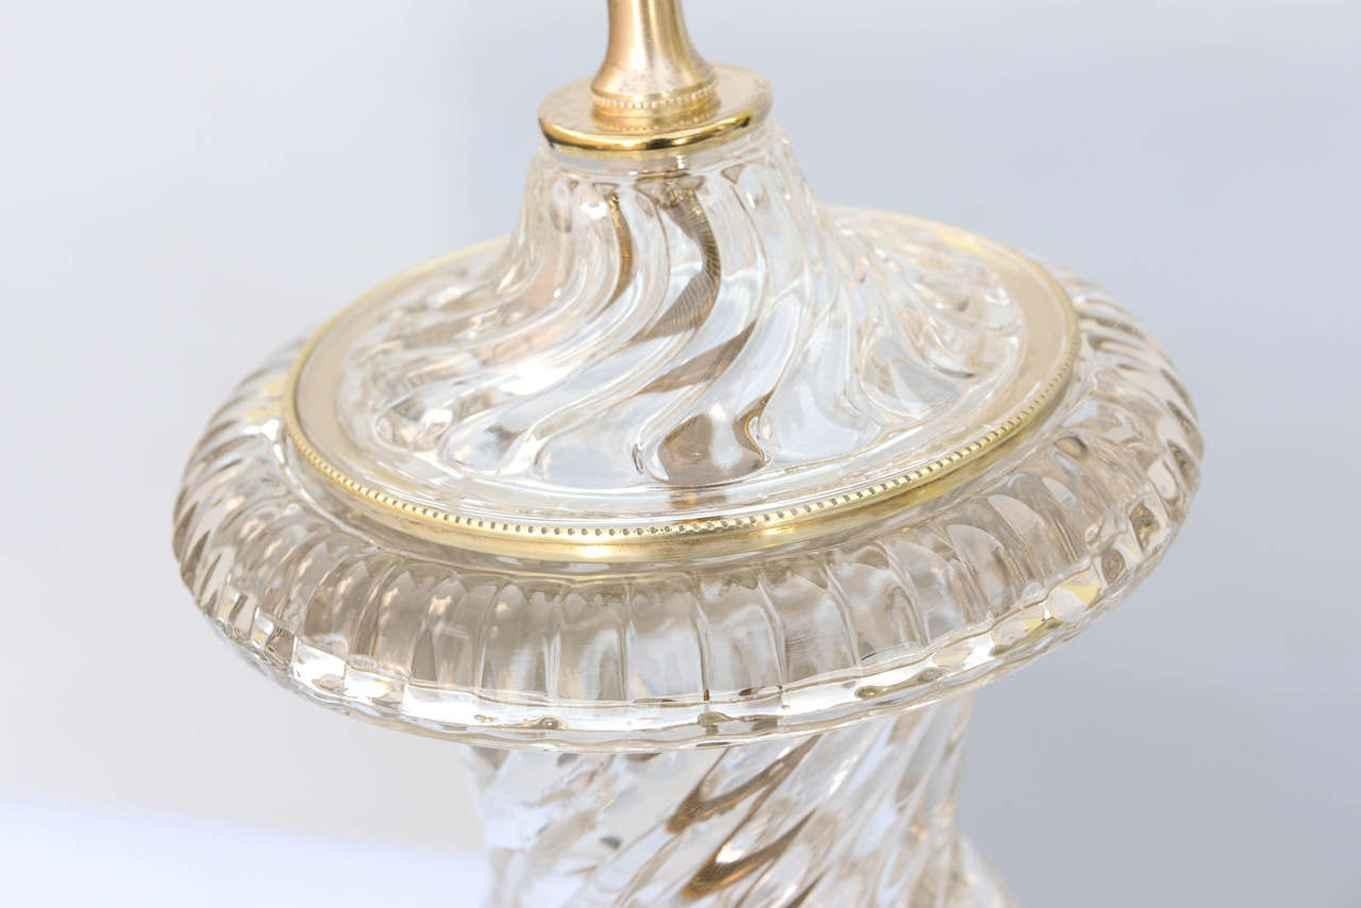 American Pair of Spiral Urn Baccarat Glass Lamps